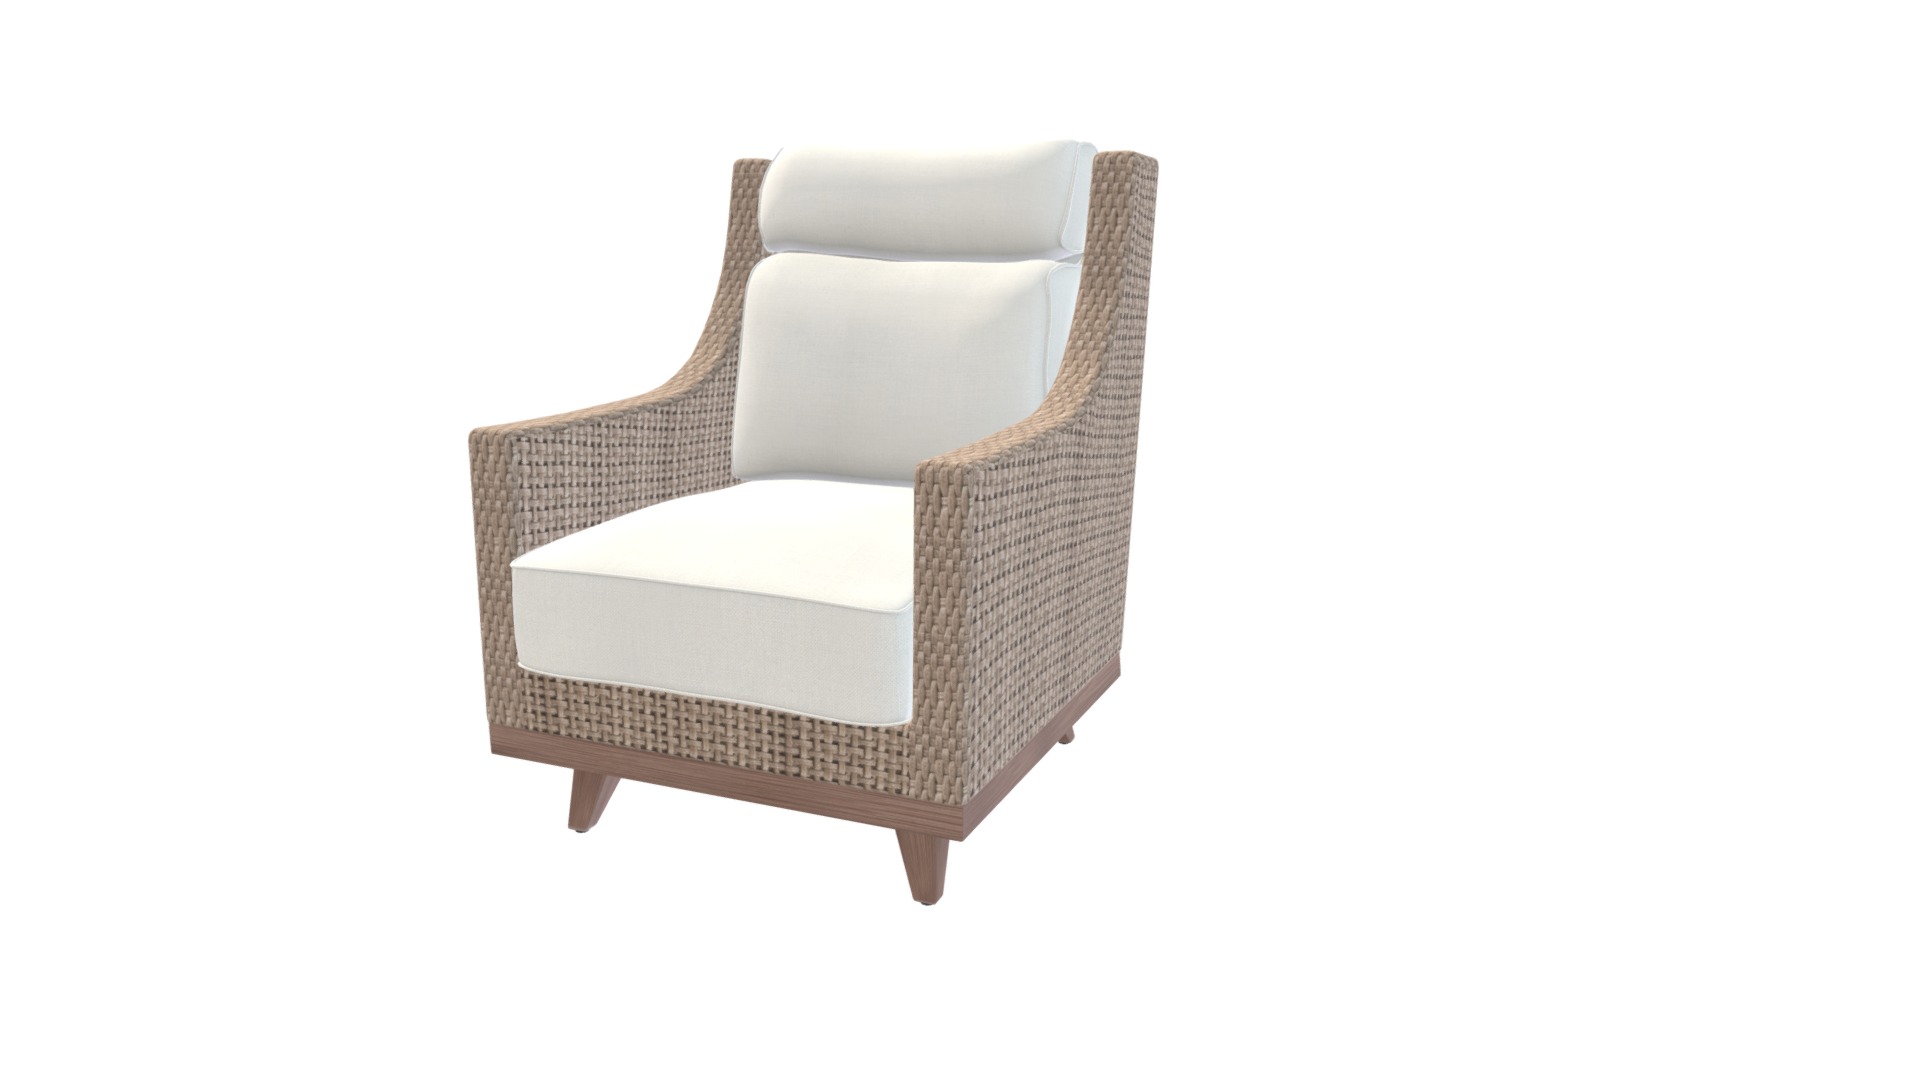 3D model Patio Arm Chair - This is a 3D model of the Patio Arm Chair. The 3D model is about a chair with a cushion.